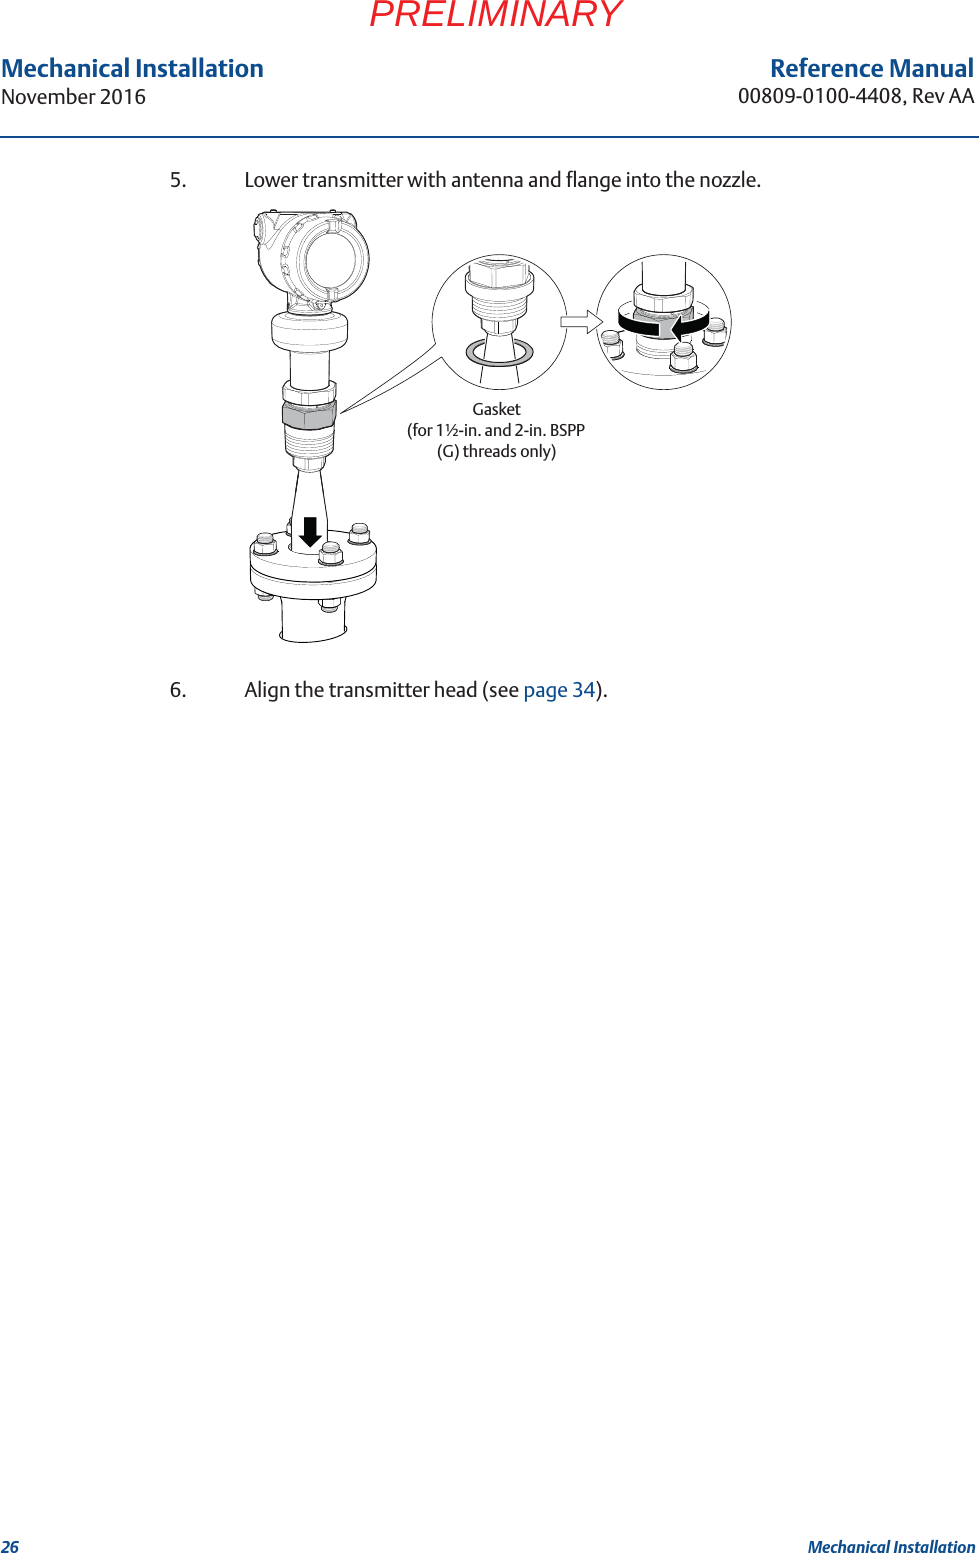 26Reference Manual00809-0100-4408, Rev AAMechanical InstallationNovember 2016Mechanical InstallationPRELIMINARY5. Lower transmitter with antenna and flange into the nozzle.6. Align the transmitter head (see page 34).Gasket (for 1½-in. and 2-in. BSPP (G) threads only)